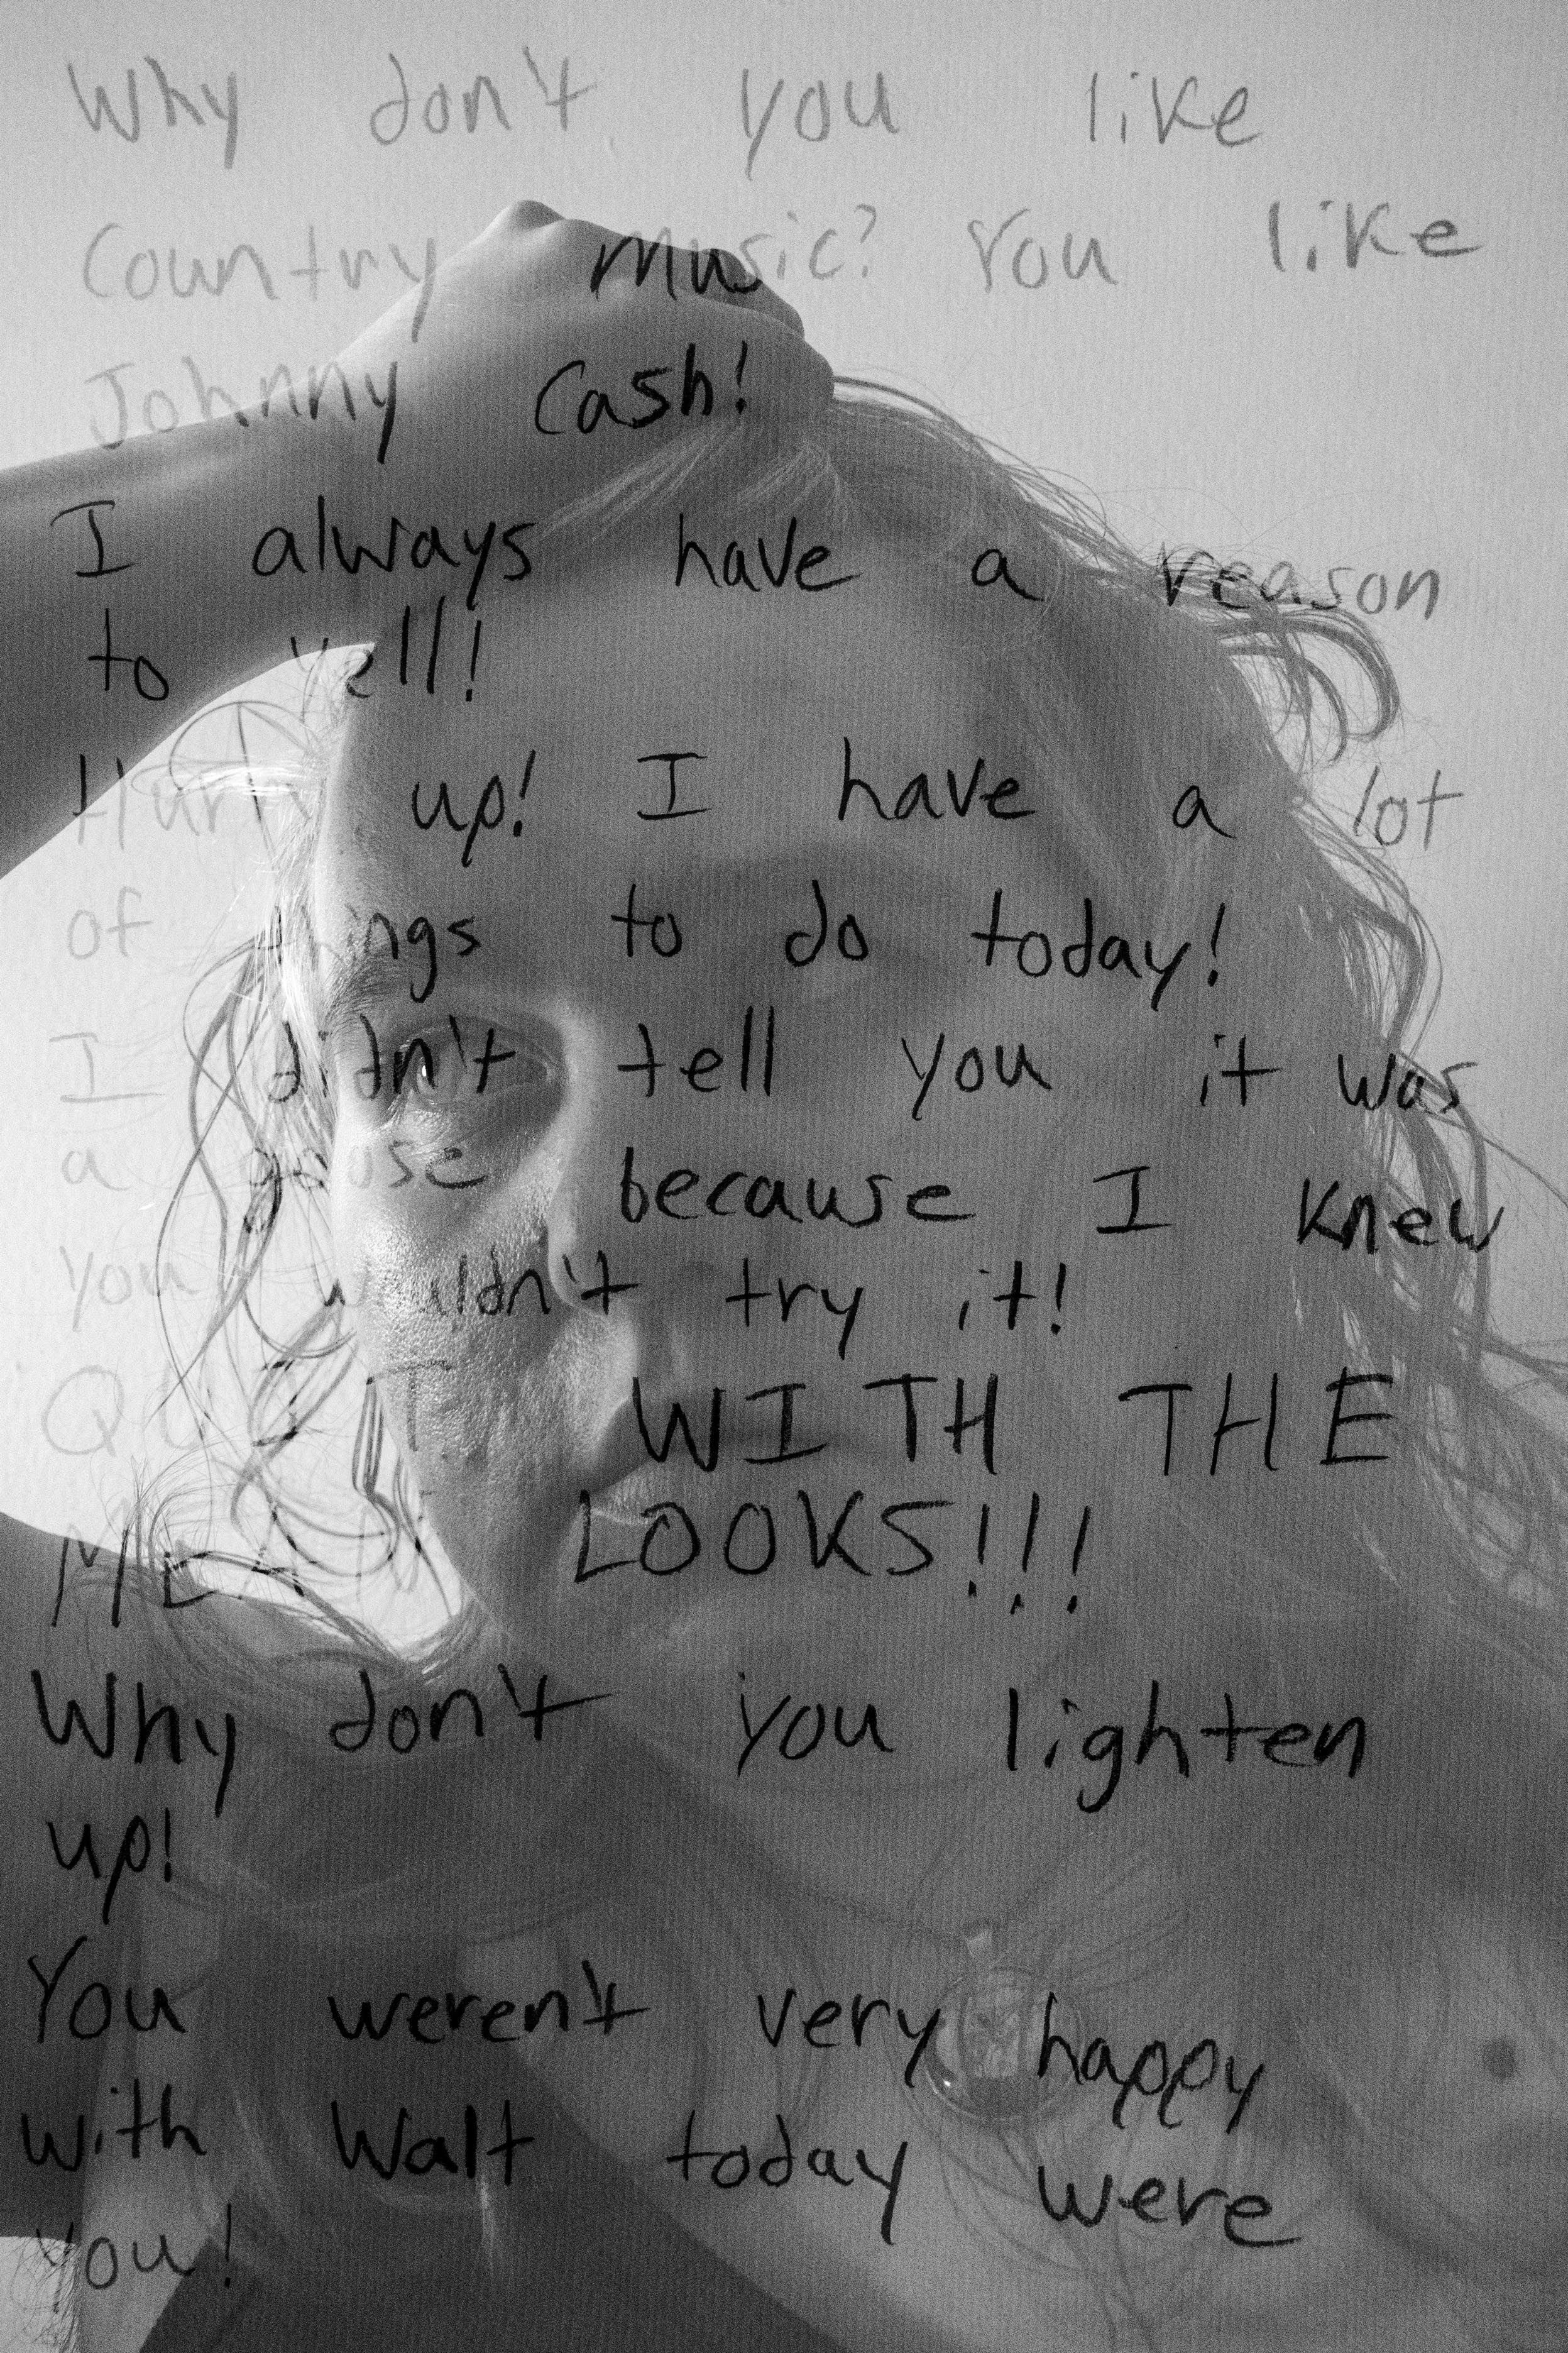 A black and white photo of a light-skinned person running their hand through their curly textured hair, with a distressed expression. Hand-written degrading words and phrases are superimposed over the photo.